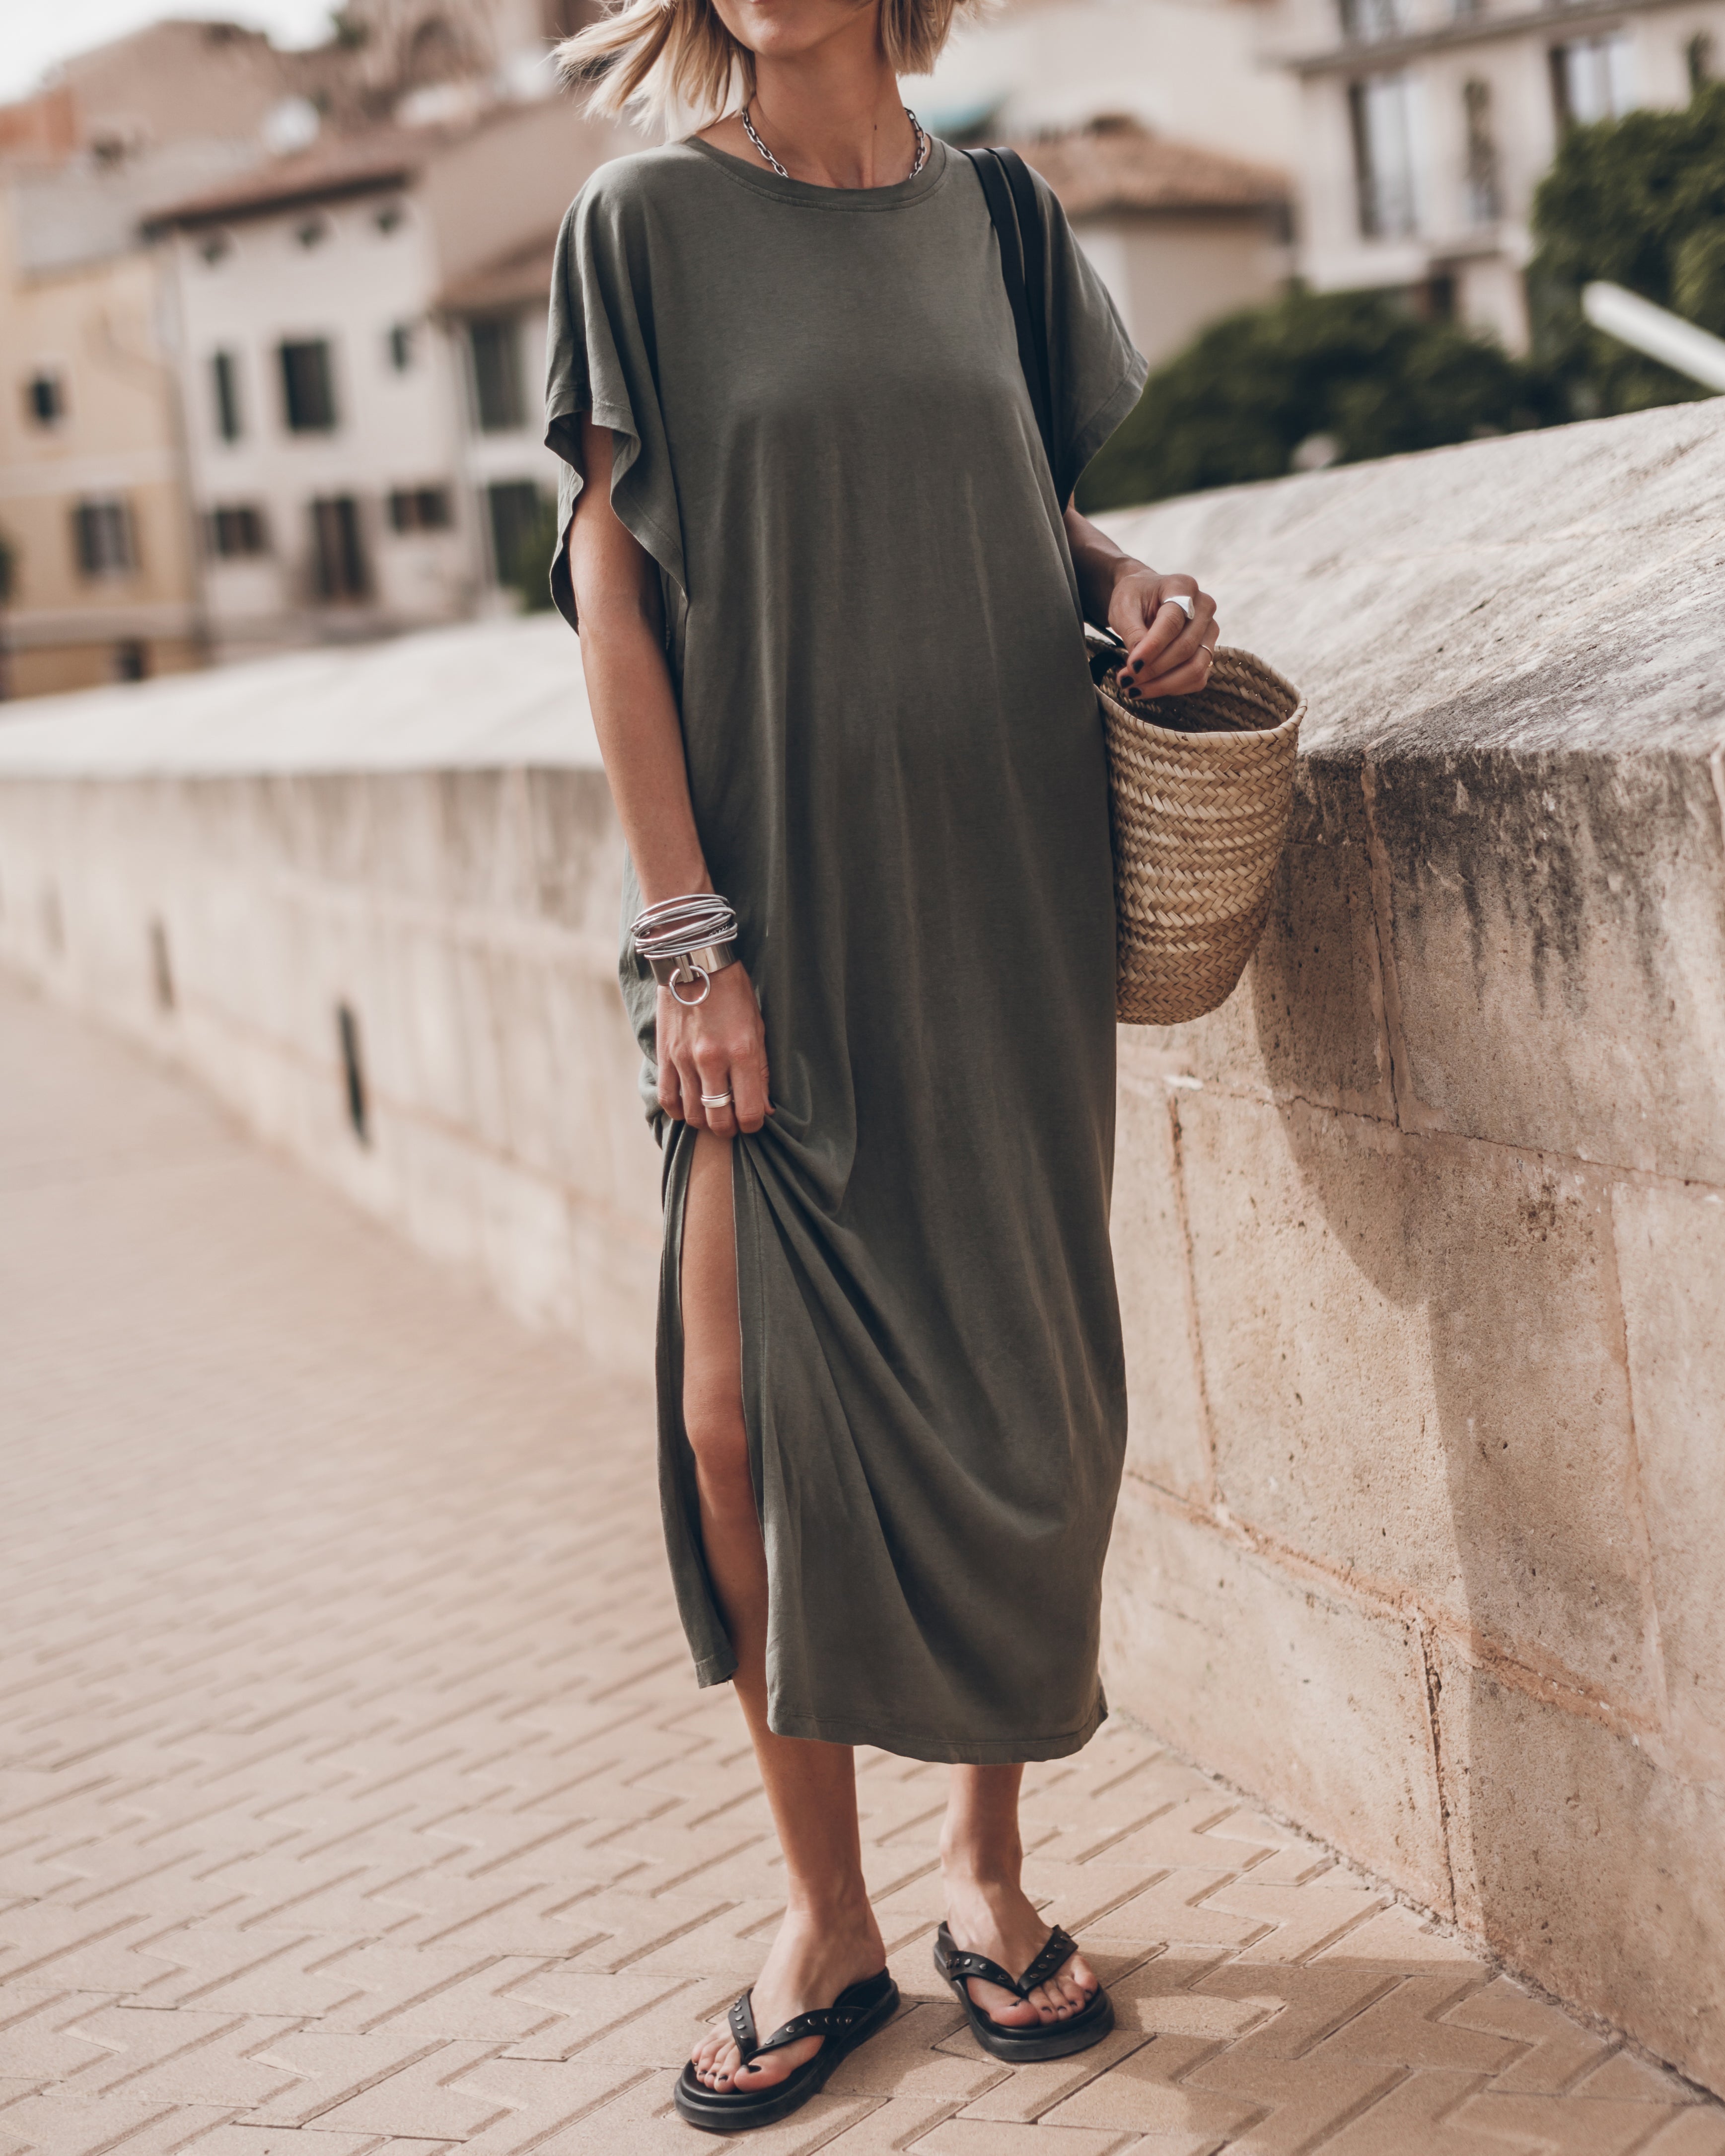 The Olive Long Batwing Dress